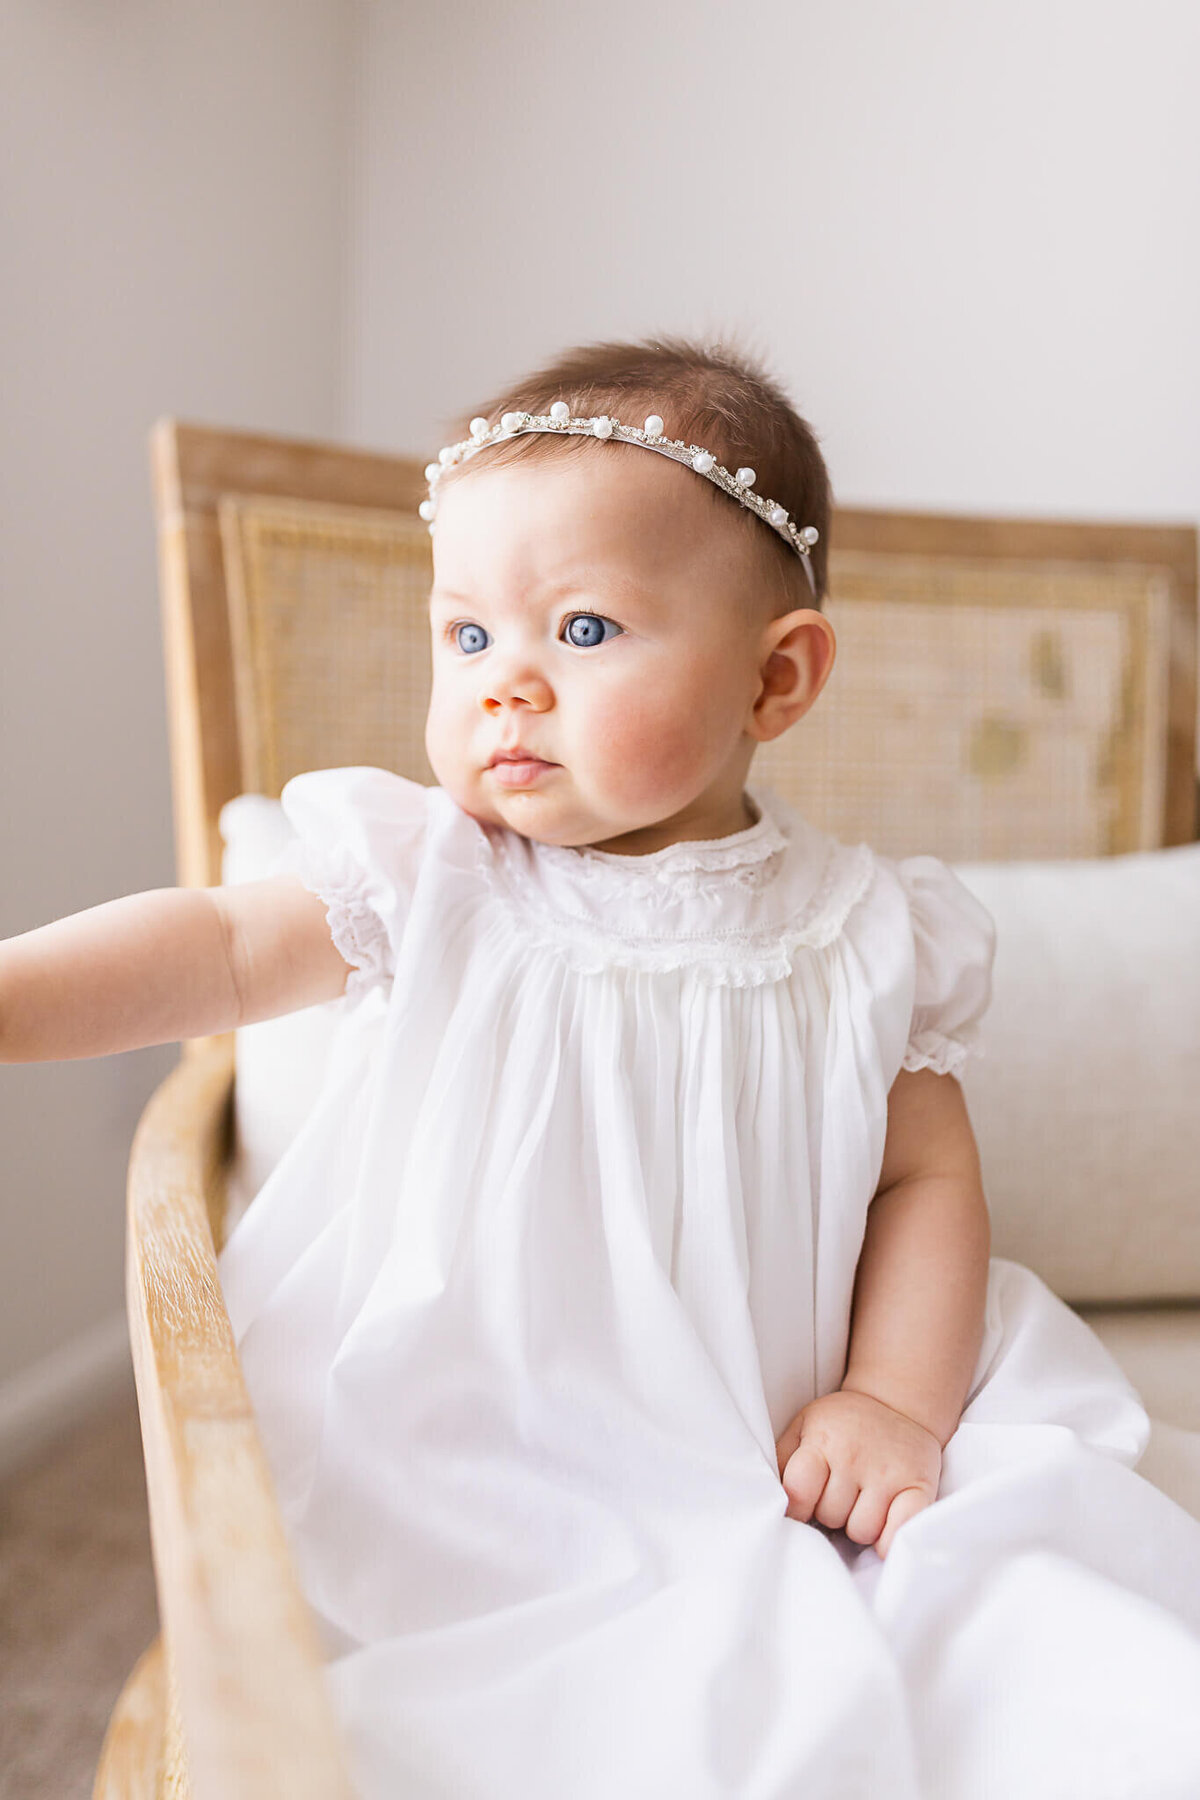 Six month old baby sitting in a chair in a white dedication dress and pearls